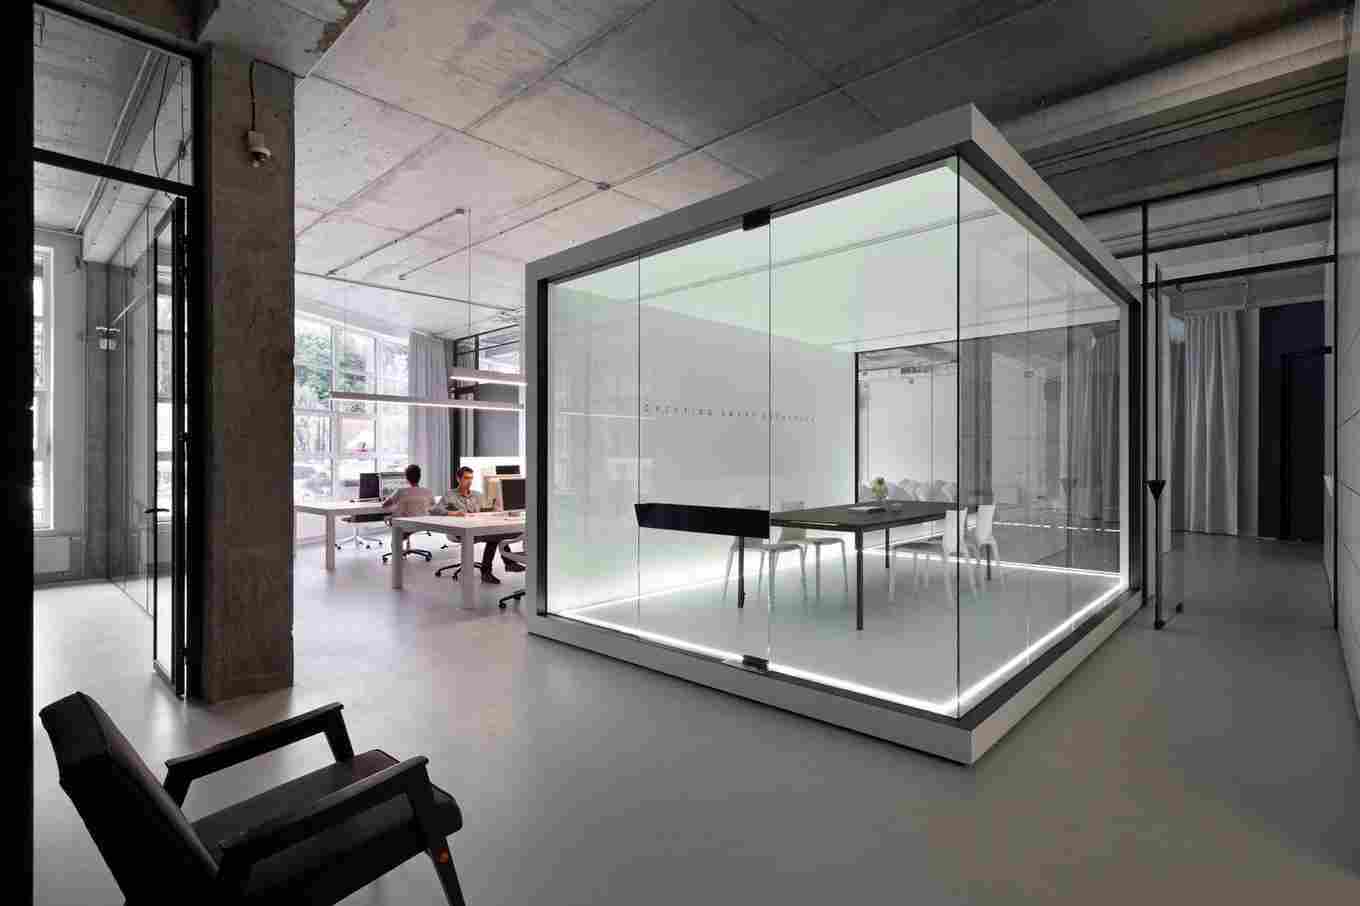 Use of glass in an office room